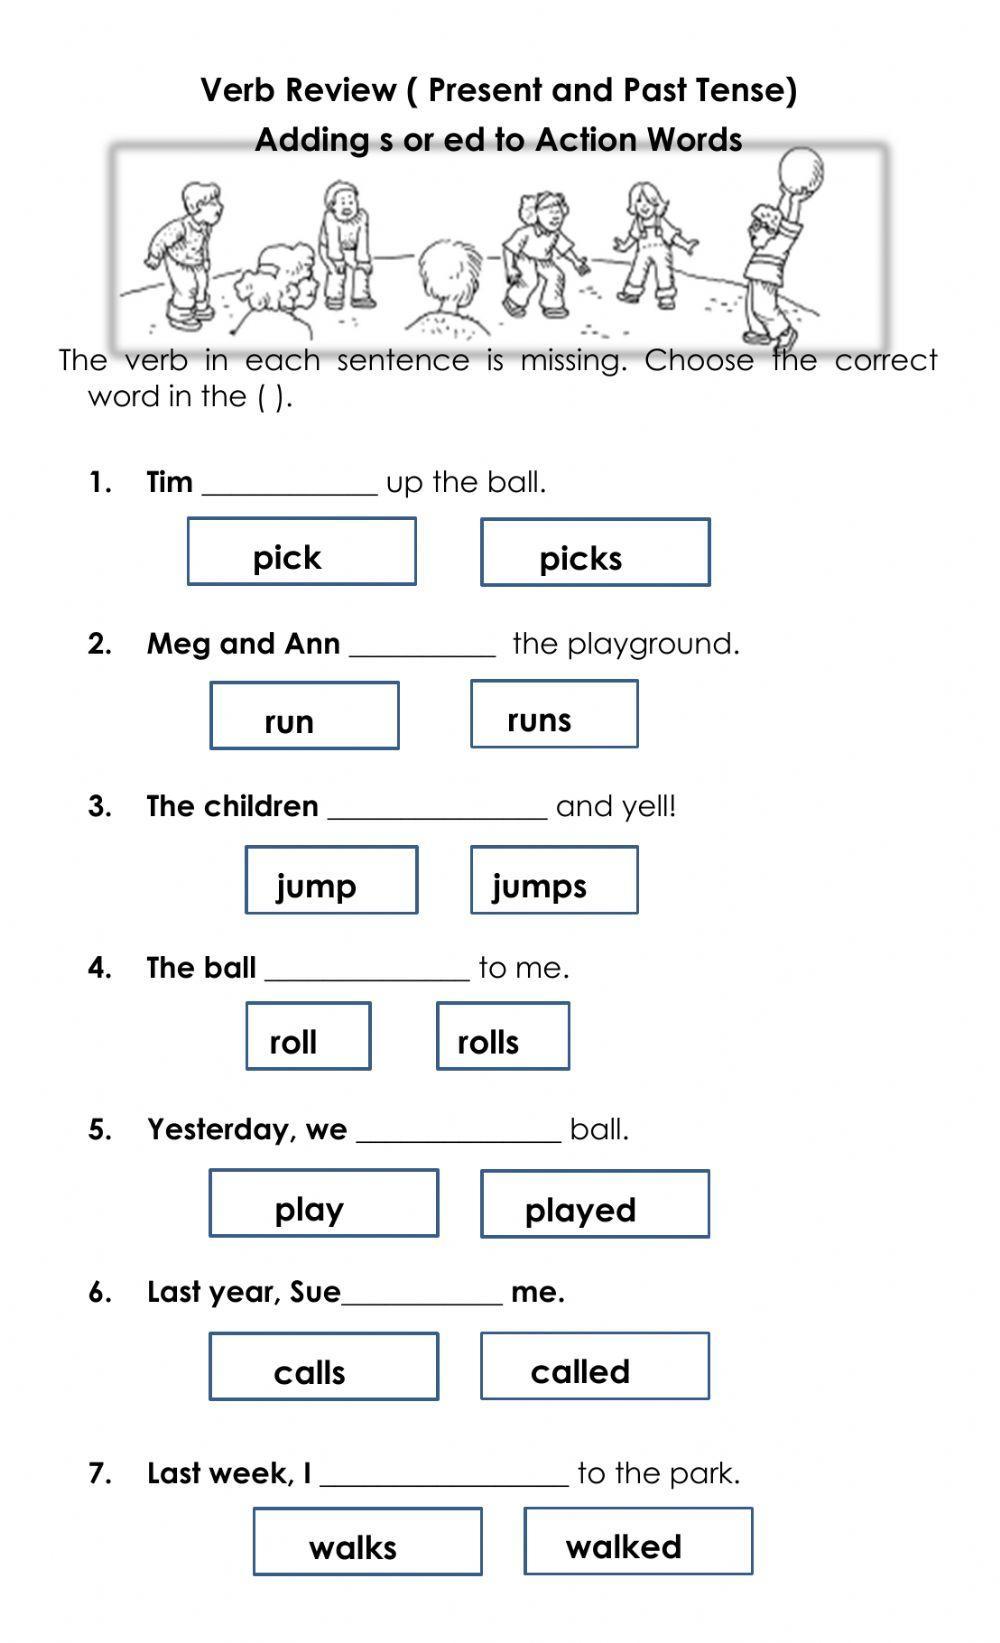 Review: Present and Past Tense Verbs